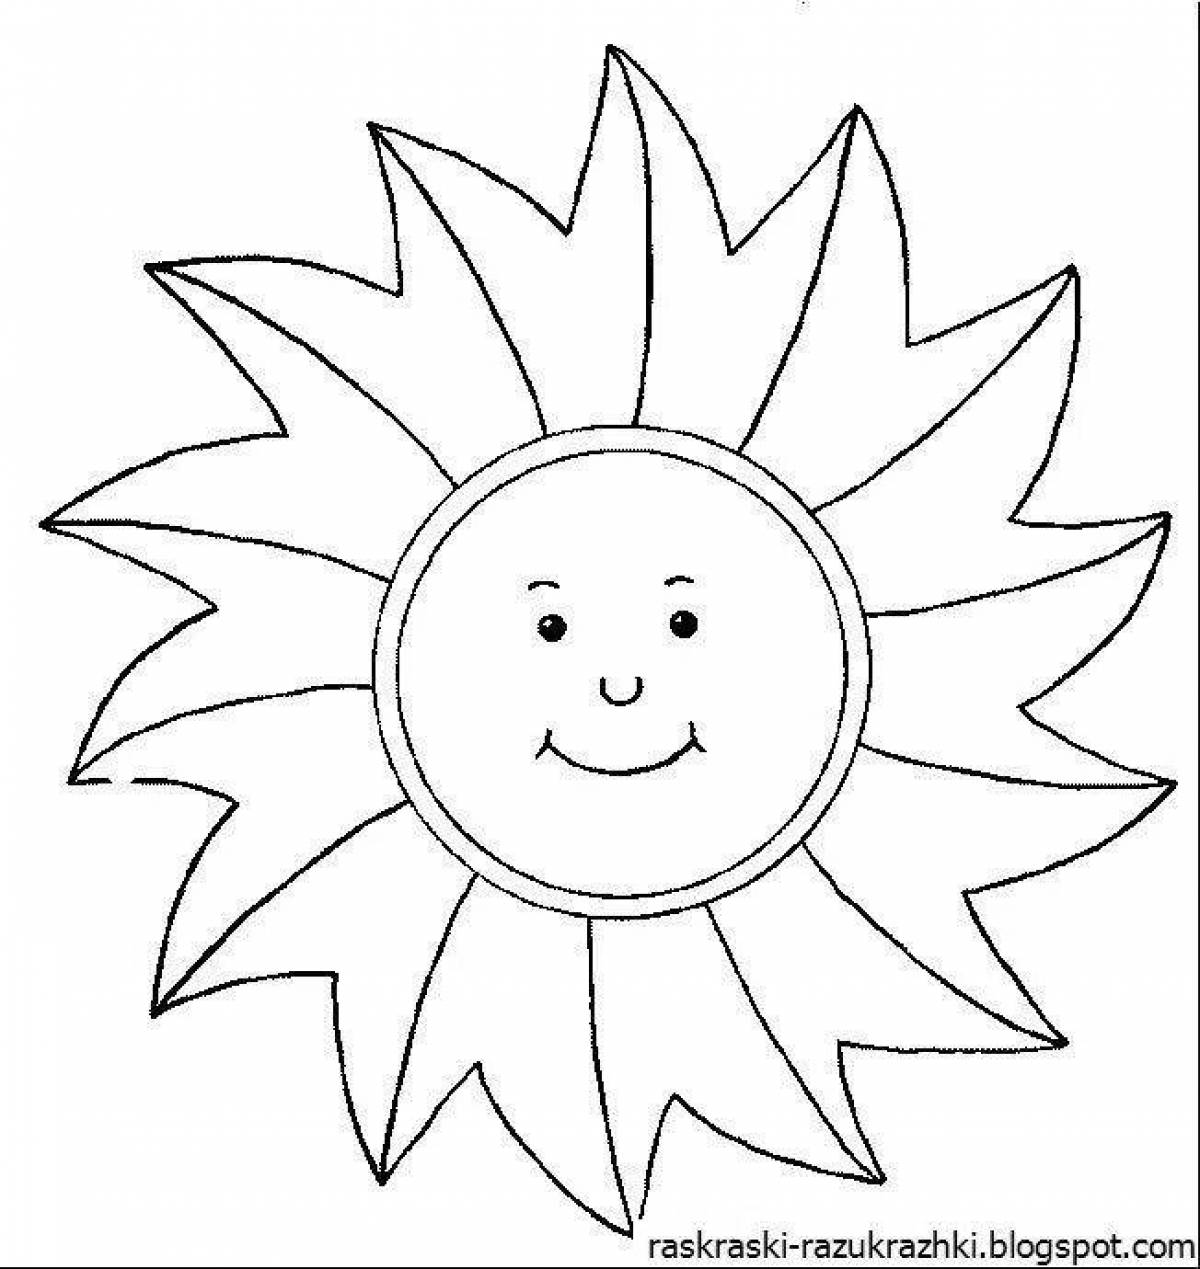 Amazing coloring picture of the sun